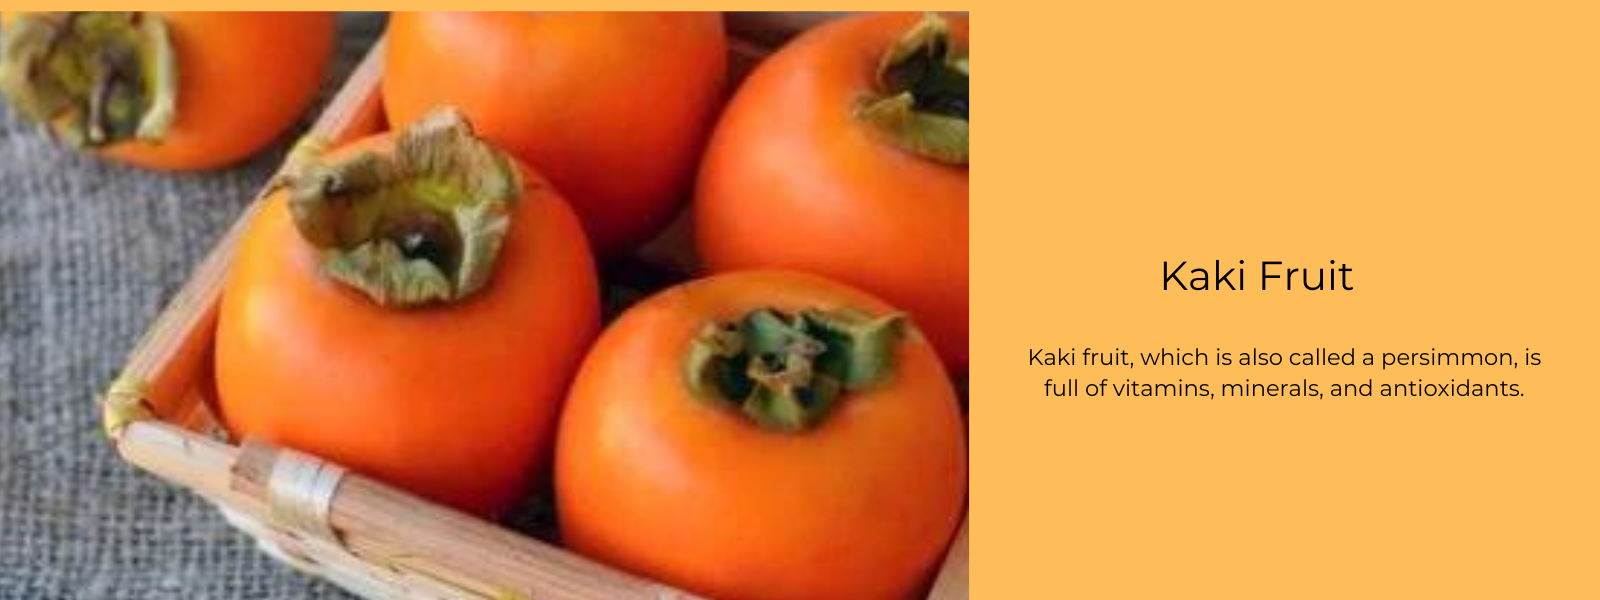 Kaki Fruit - Health Benefits, Uses and Important Facts